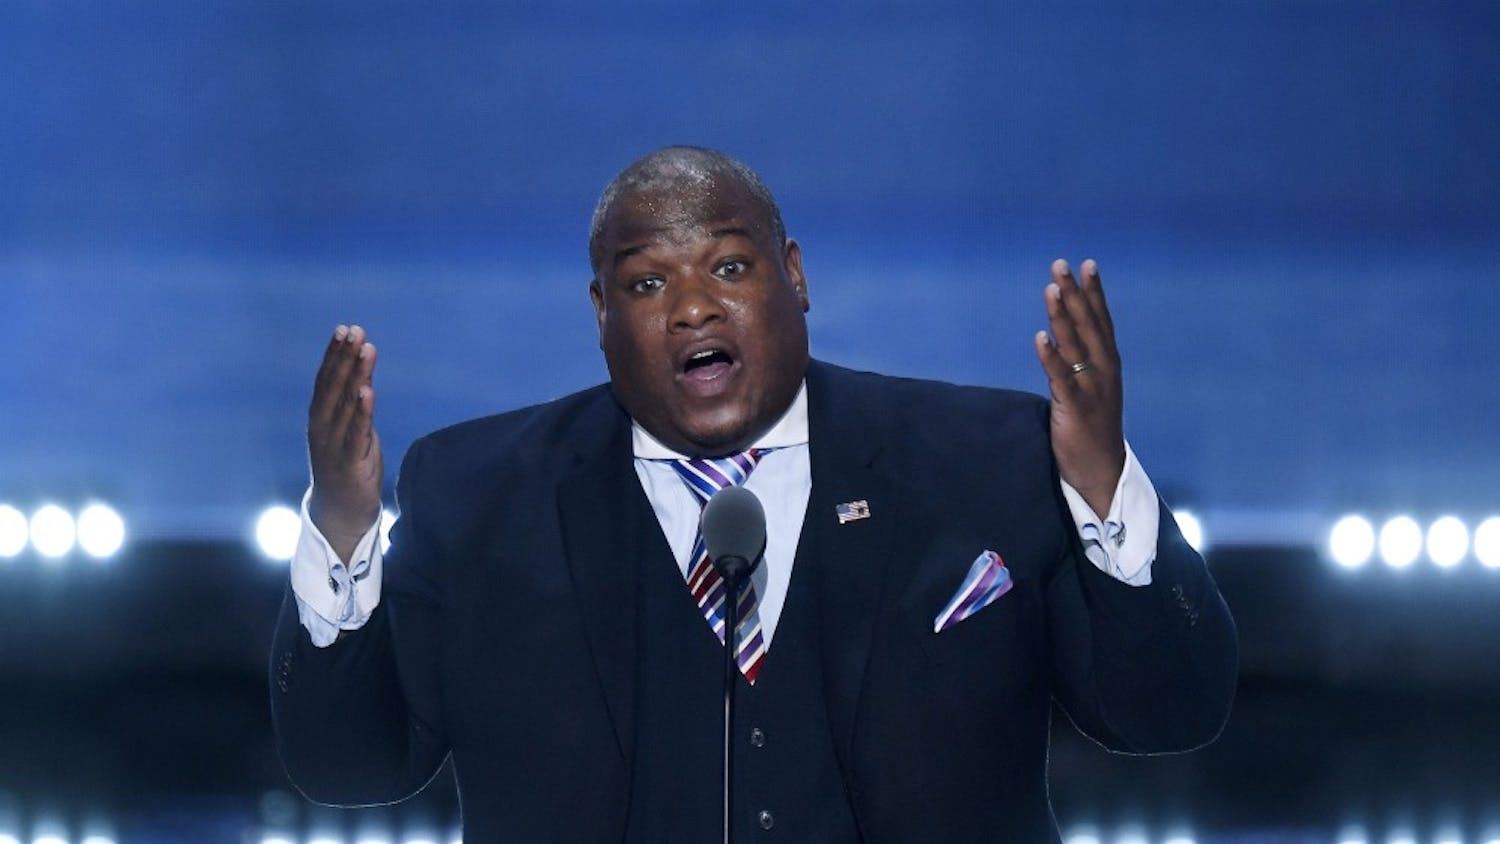 Pastor Mark Burns speaks on the last day of the Republican National Convention on Thursday, July 21, 2016, at Quicken Loans Arena in Cleveland. (Olivier Douliery/Abaca Press/TNS)